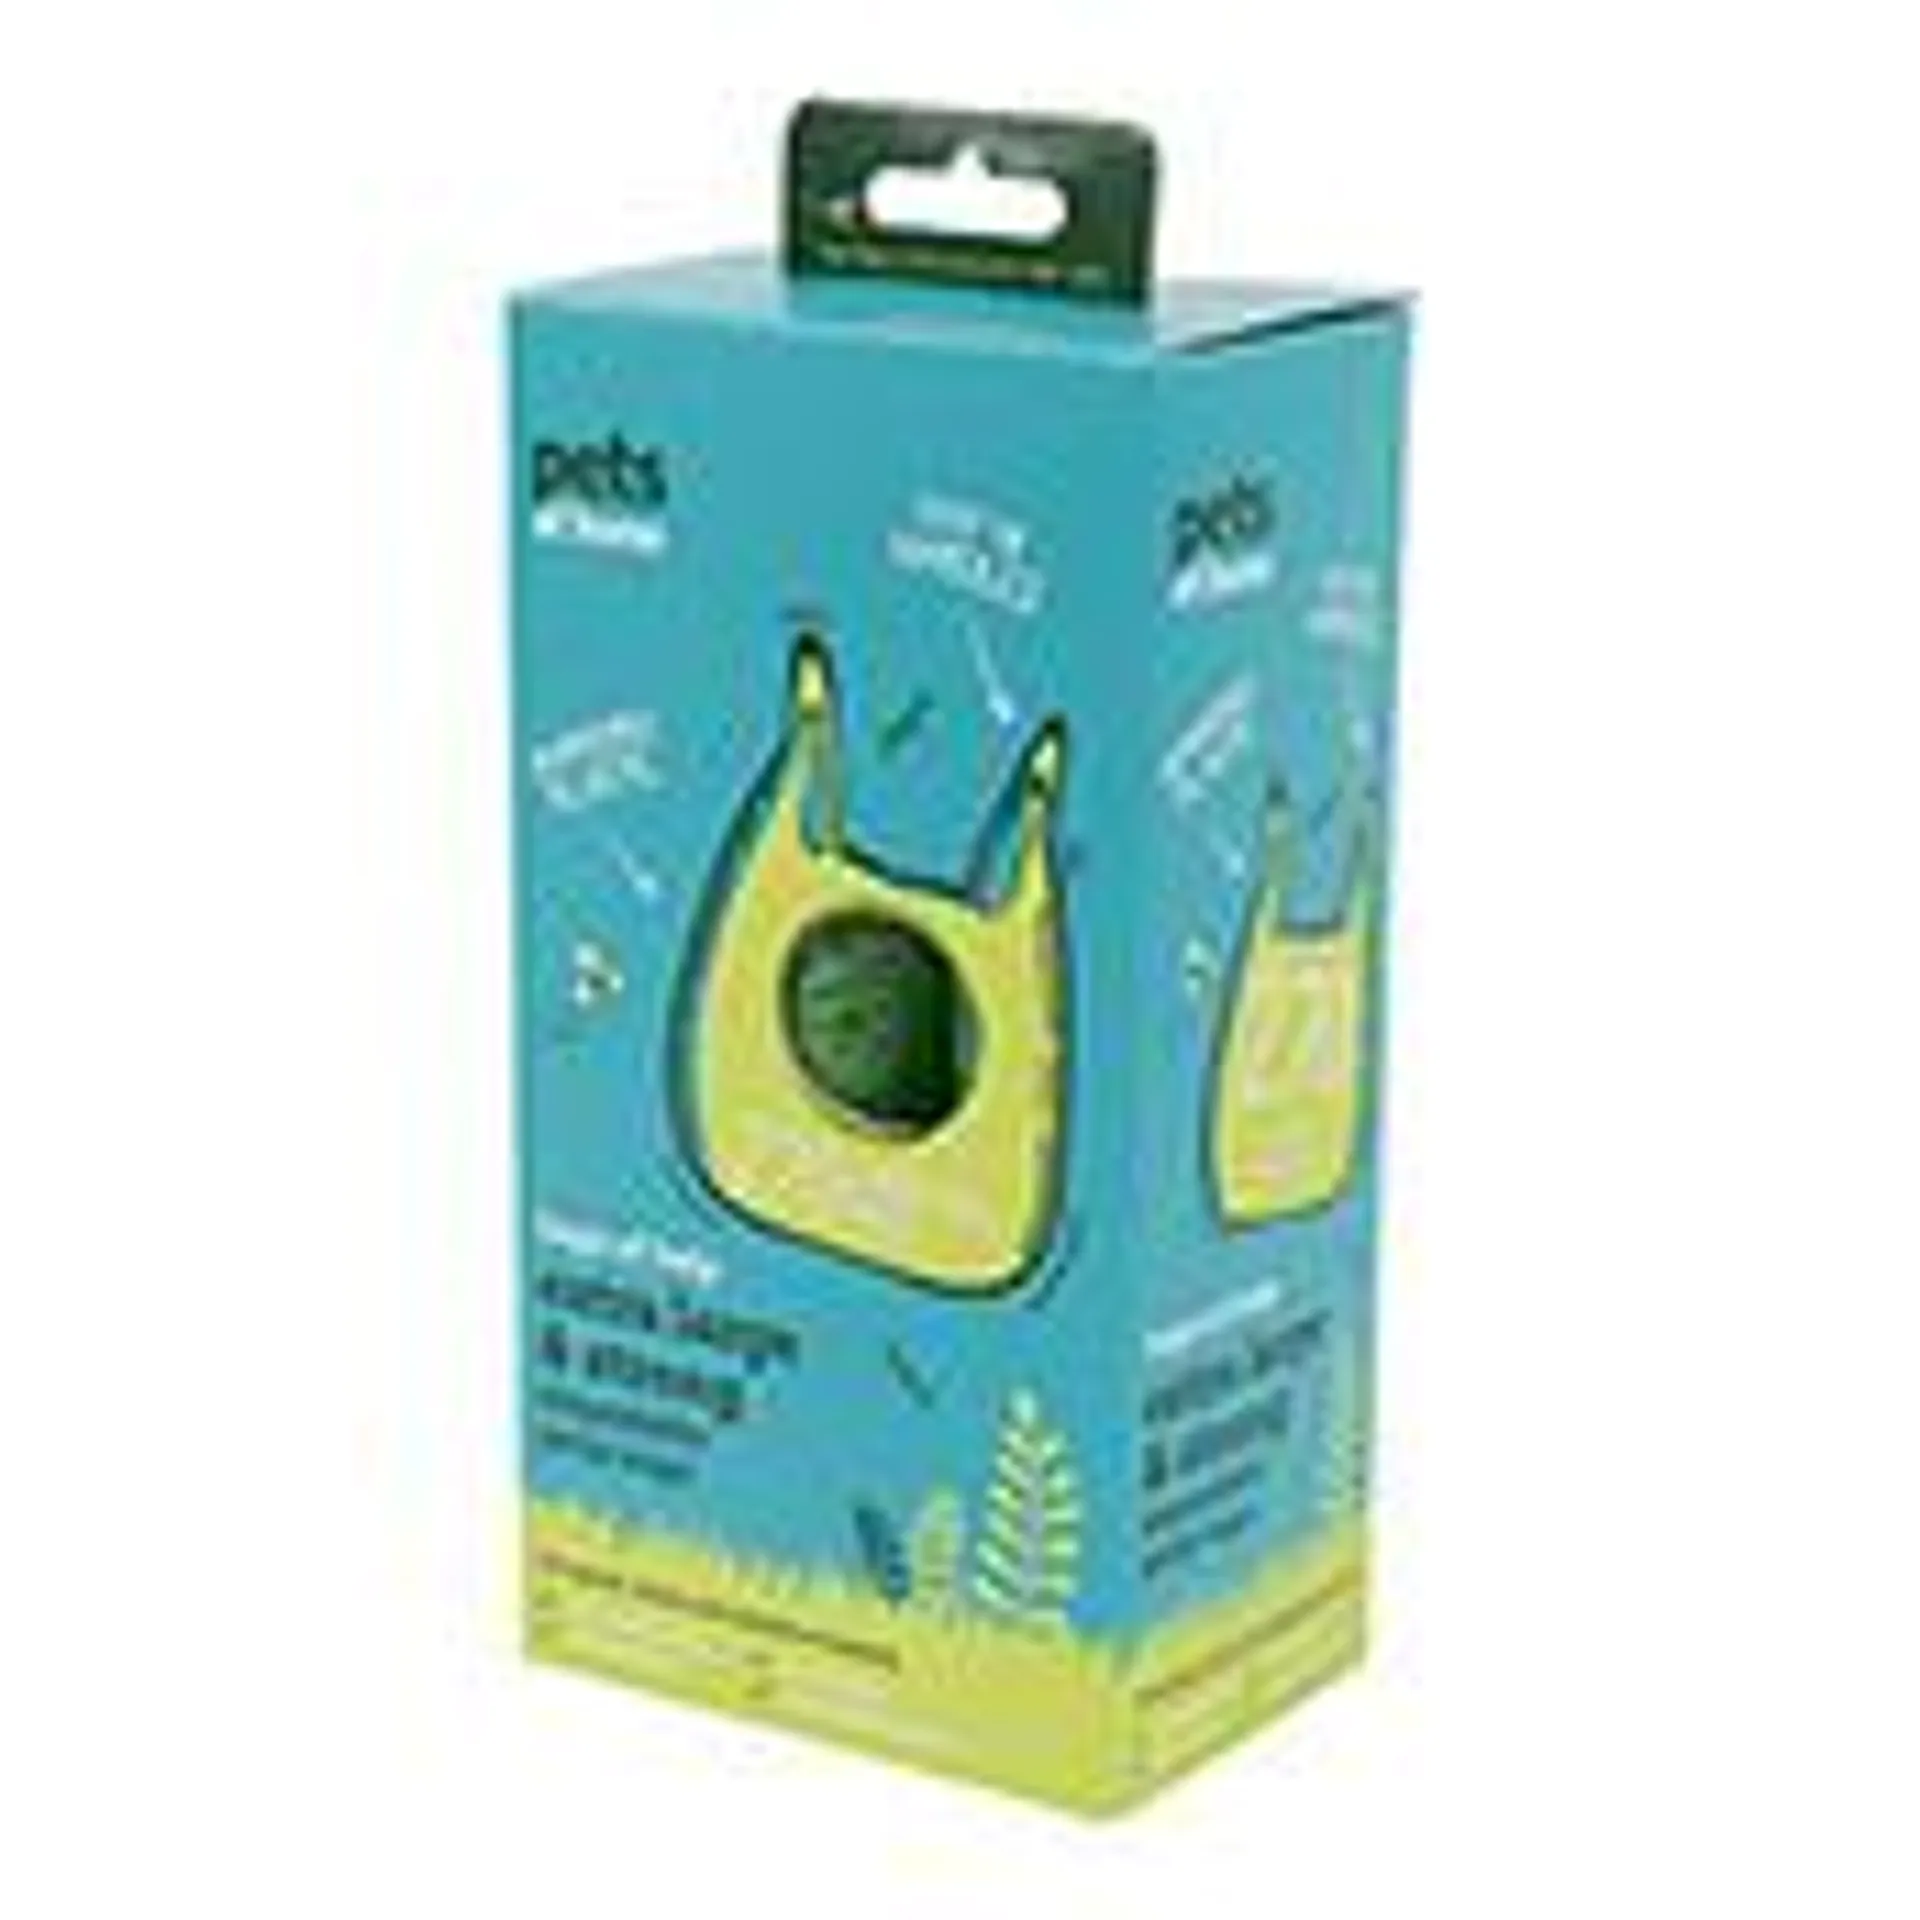 Pets at Home Bags of Help Extra Strong Degradable Dog Poop Bags XL x270